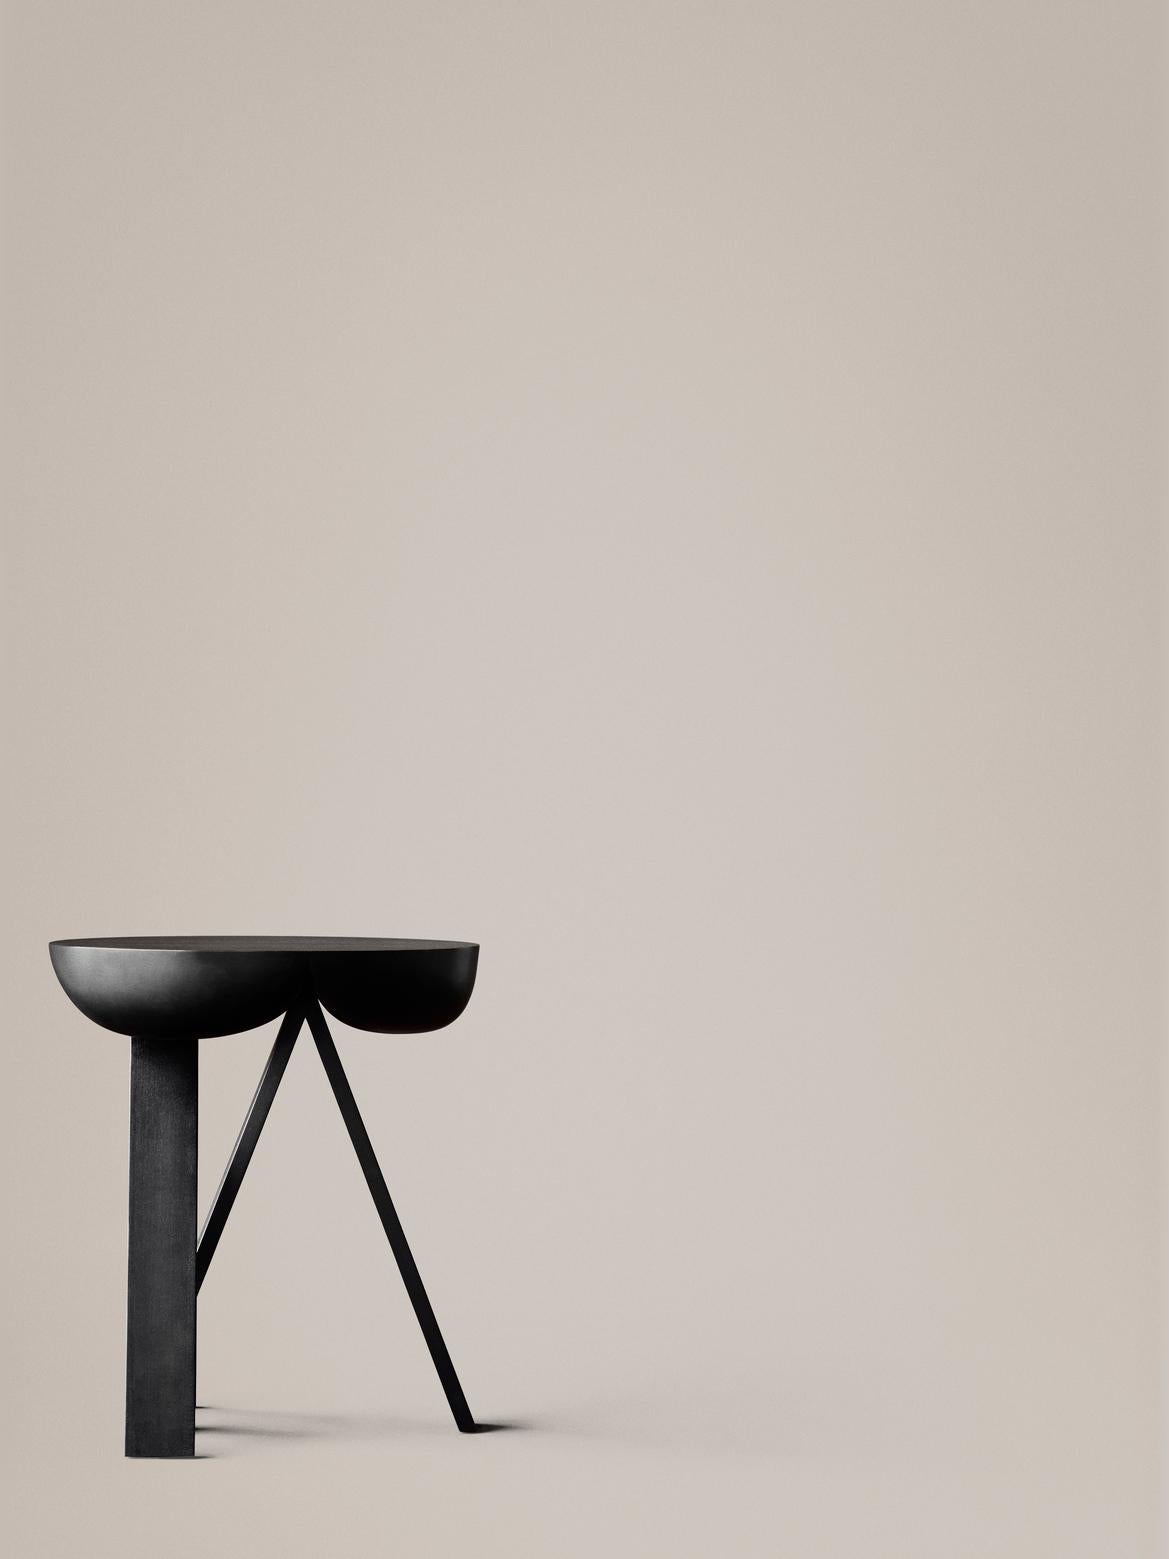 Side table designed by PlueerSmitt in 2014. 

Striking. Wooden side table consisting of two stripped-down trestles and a table top. The seemingly heavy top contrasts the rigid trestles. The top gives in and provides space for the sharp ends of the